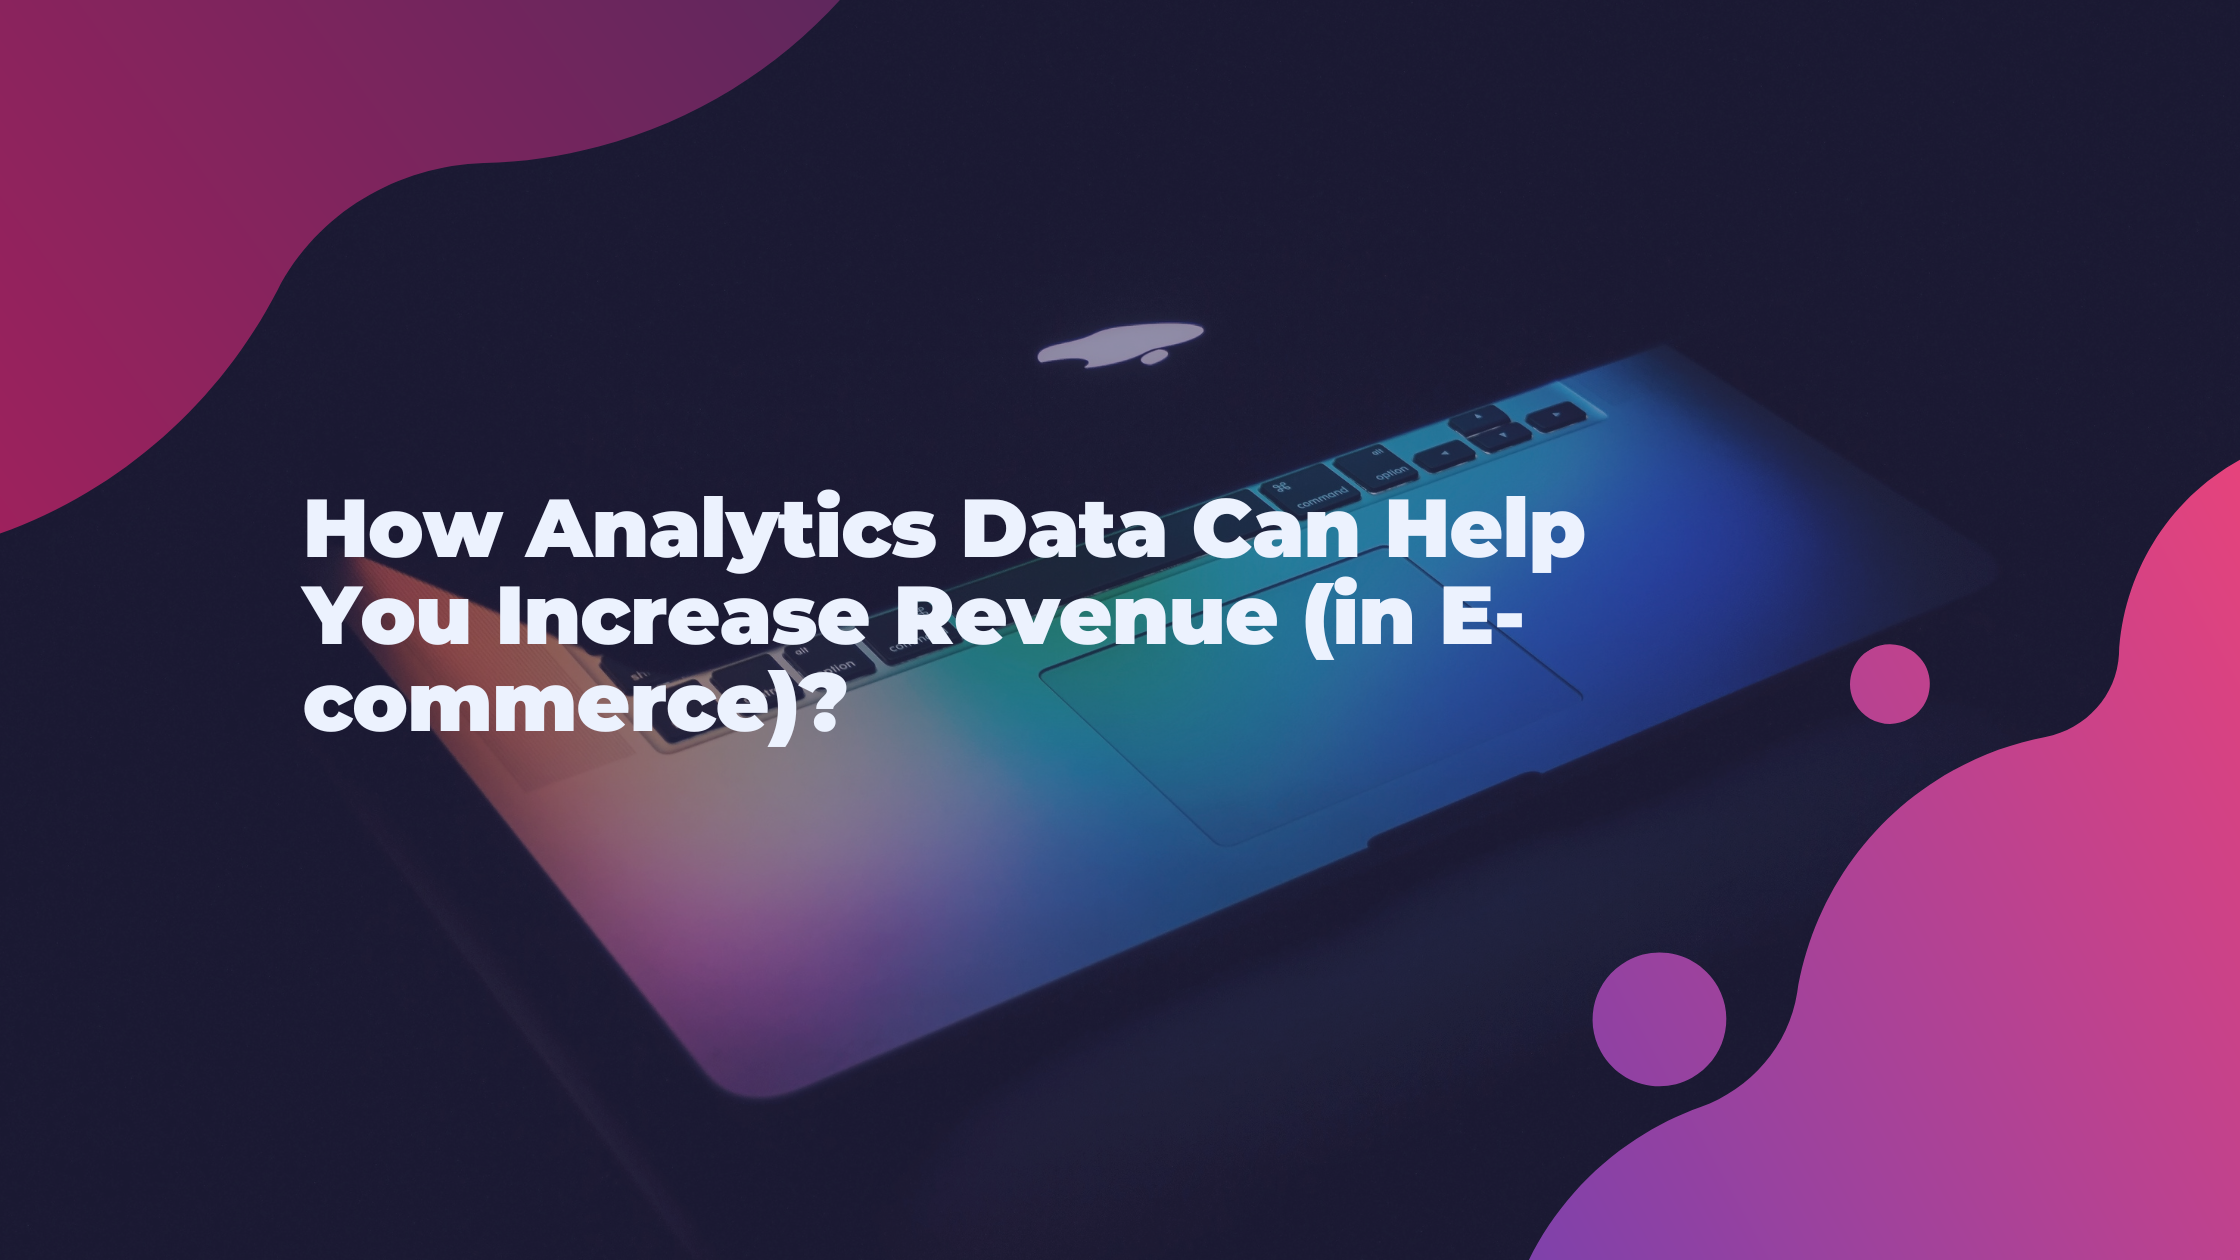 How Analytics Data Can Help You Increase Revenue (in E-commerce)?